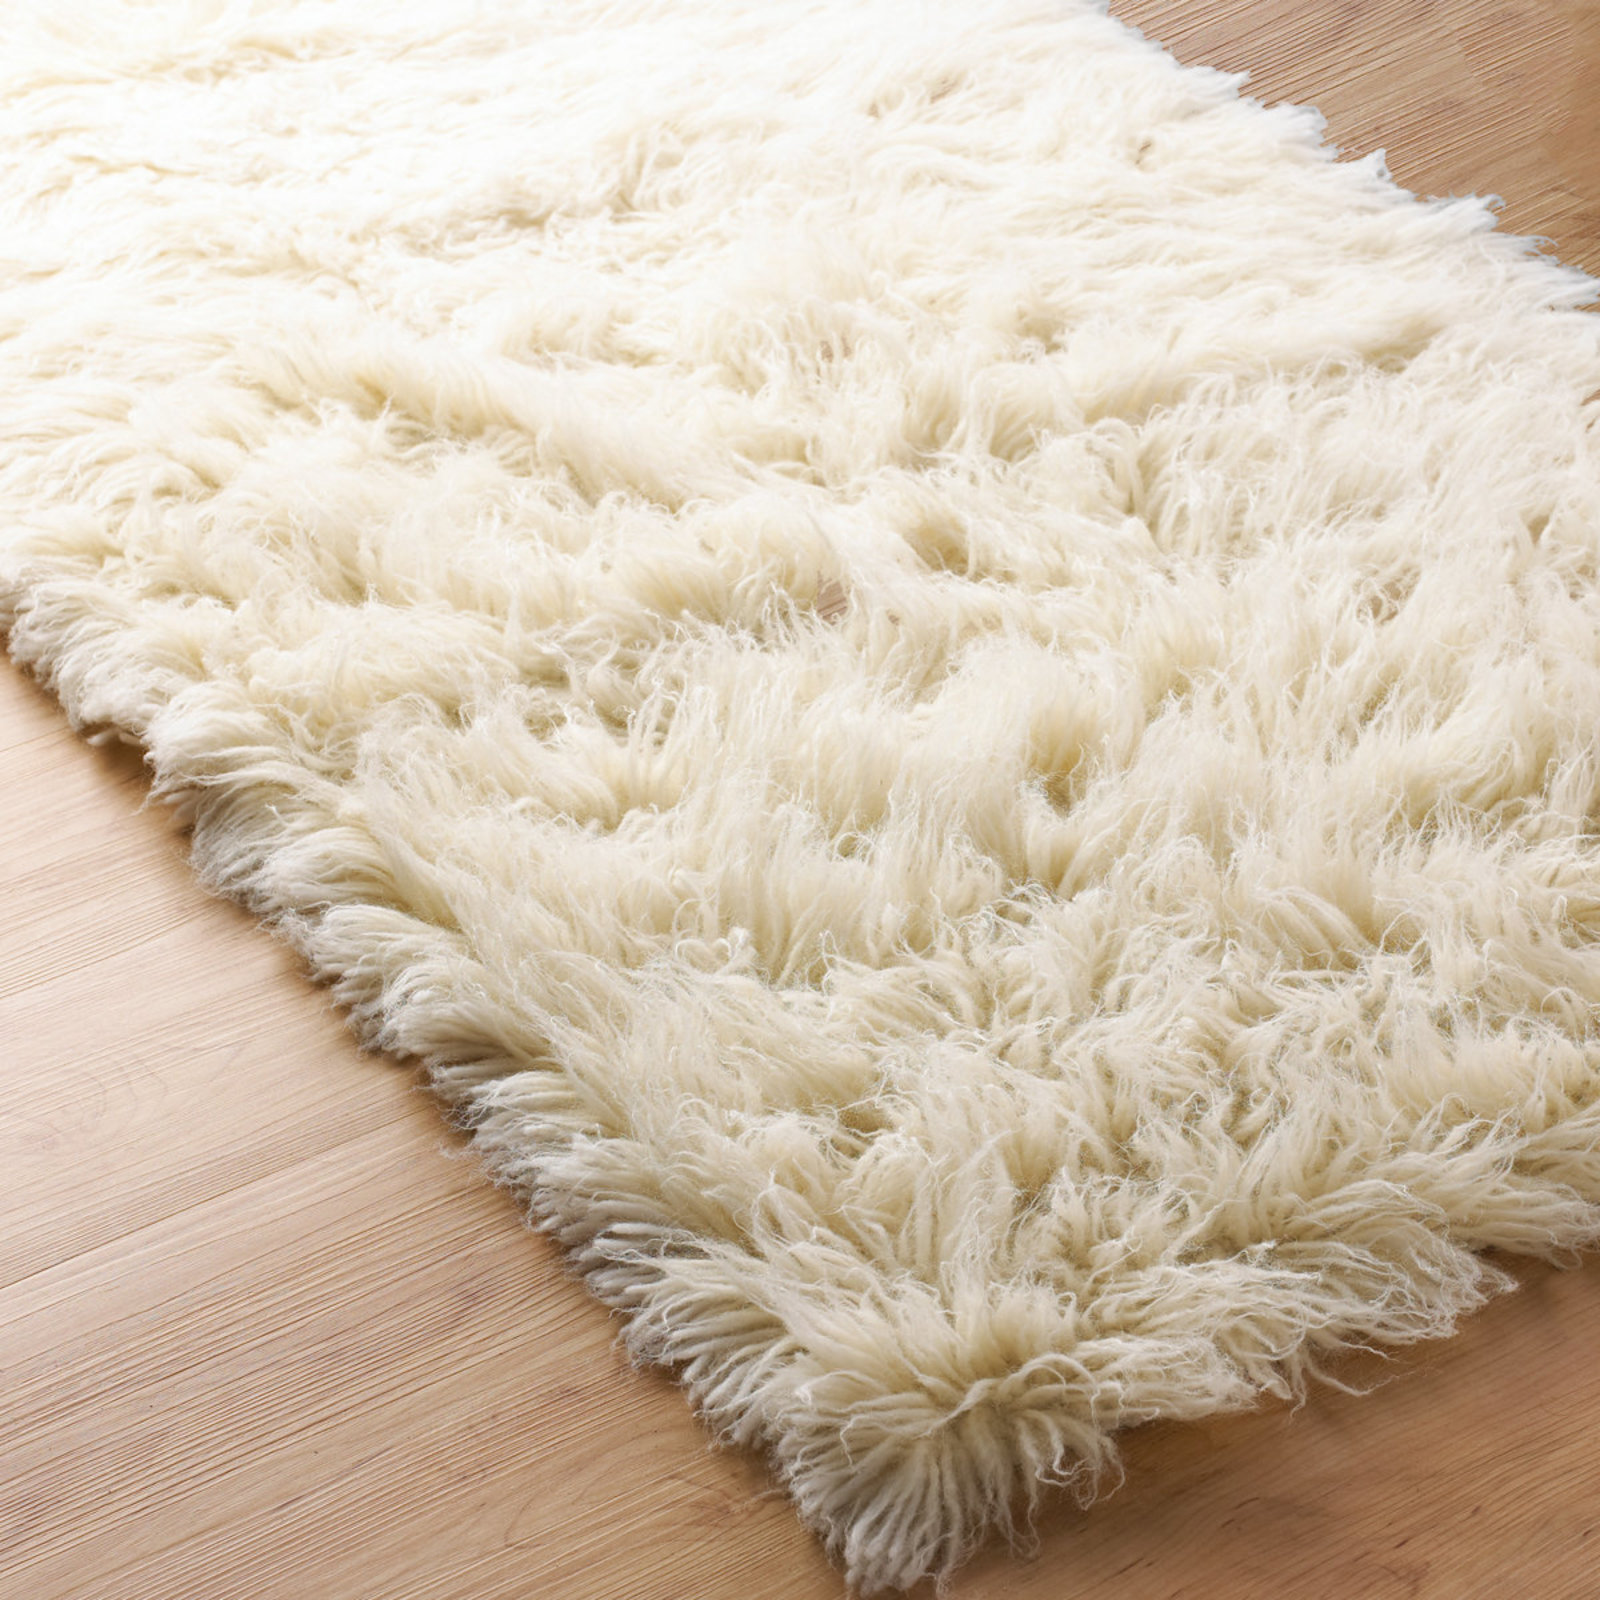 The old flokati rug; one of the best